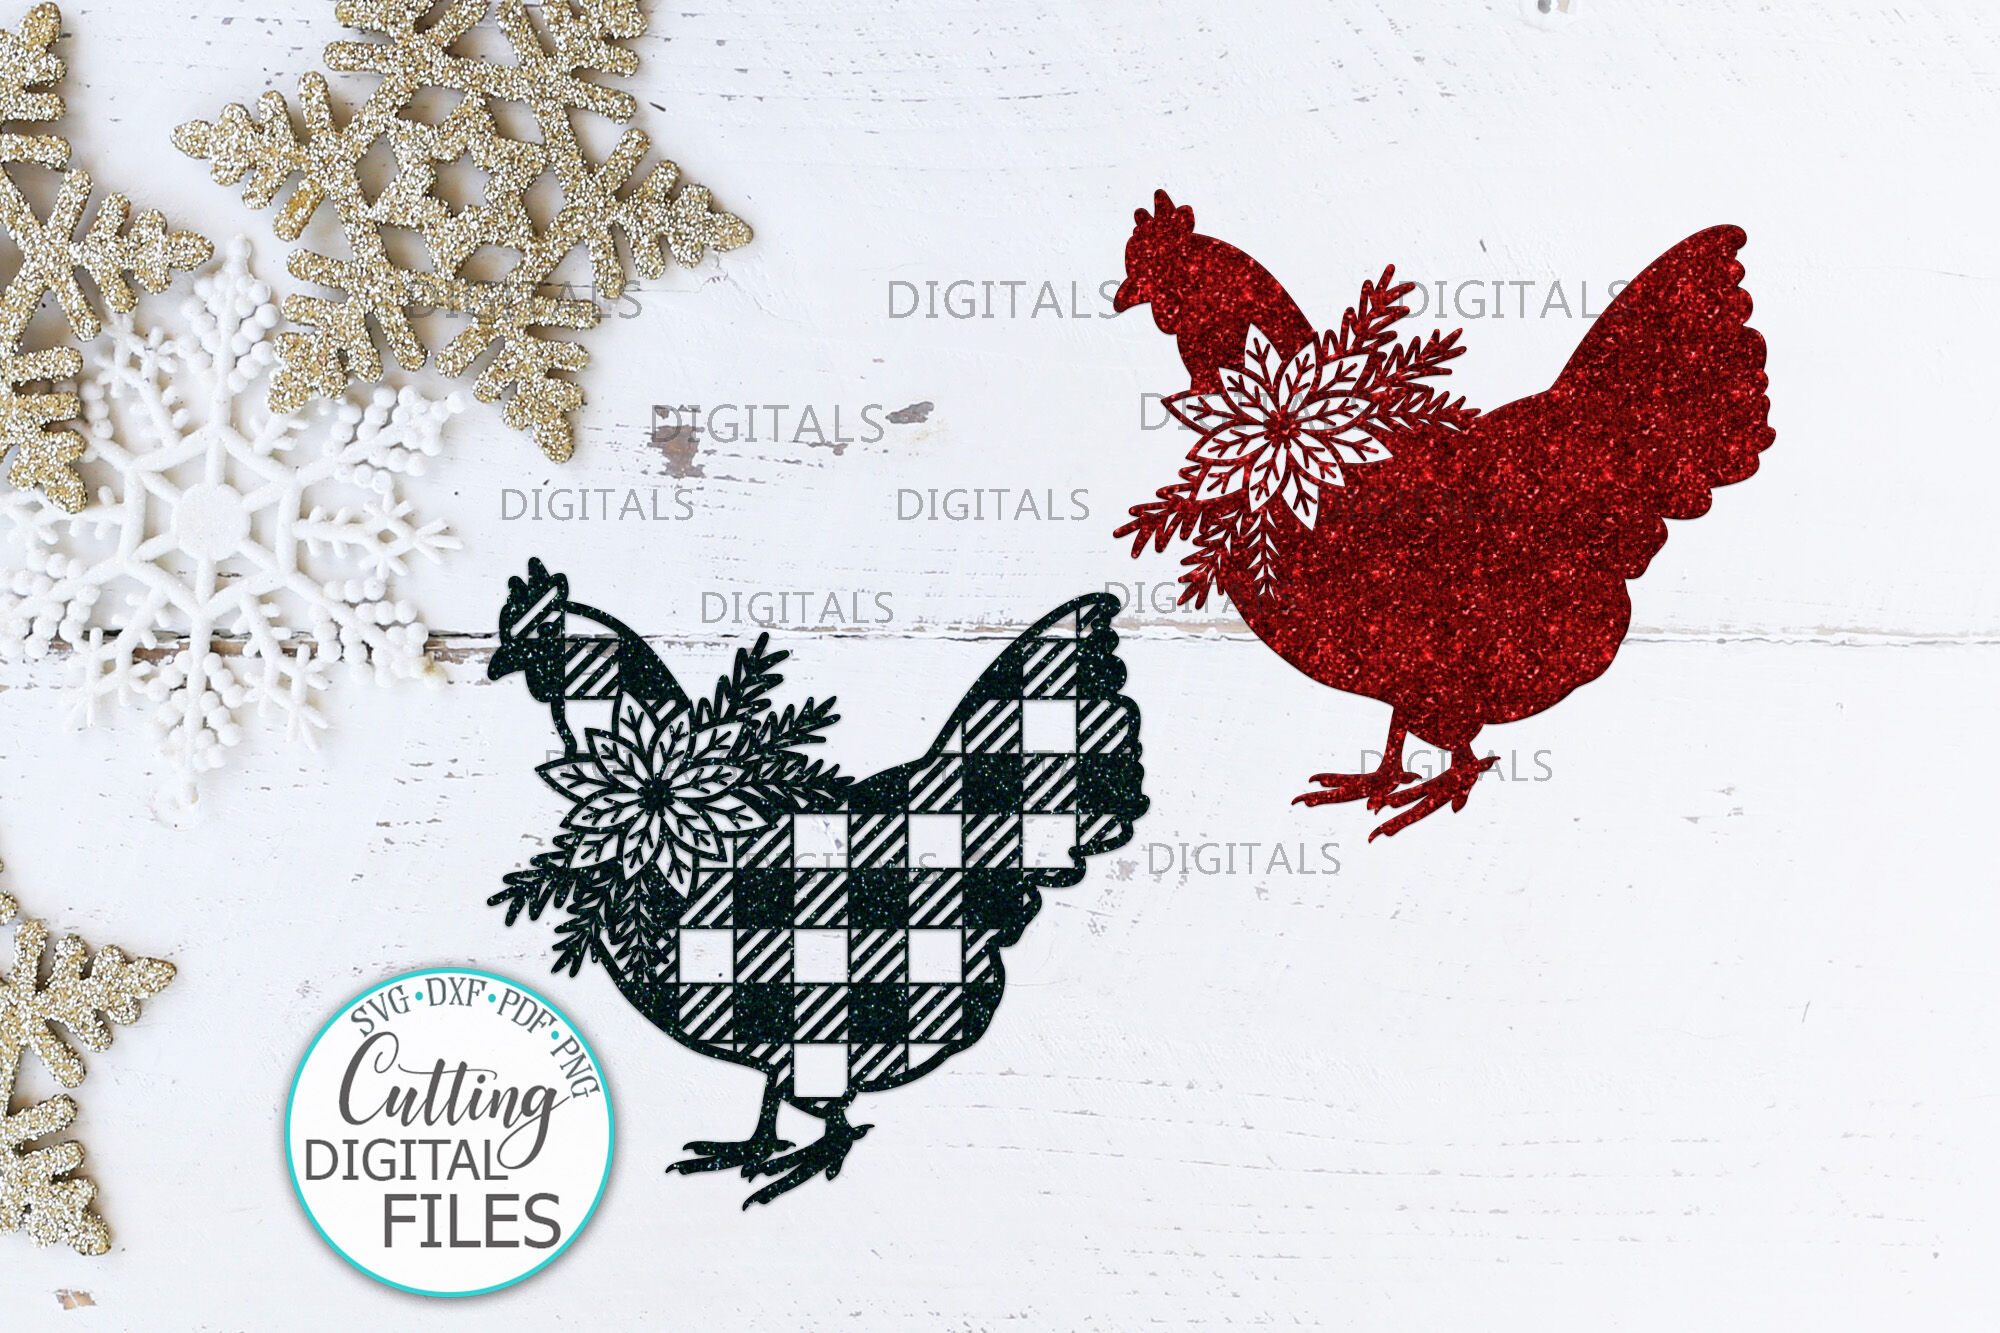 Merry Clucking Christmas Chickens SVG DXF EPS PNG Cut File Cricut Silhouette 